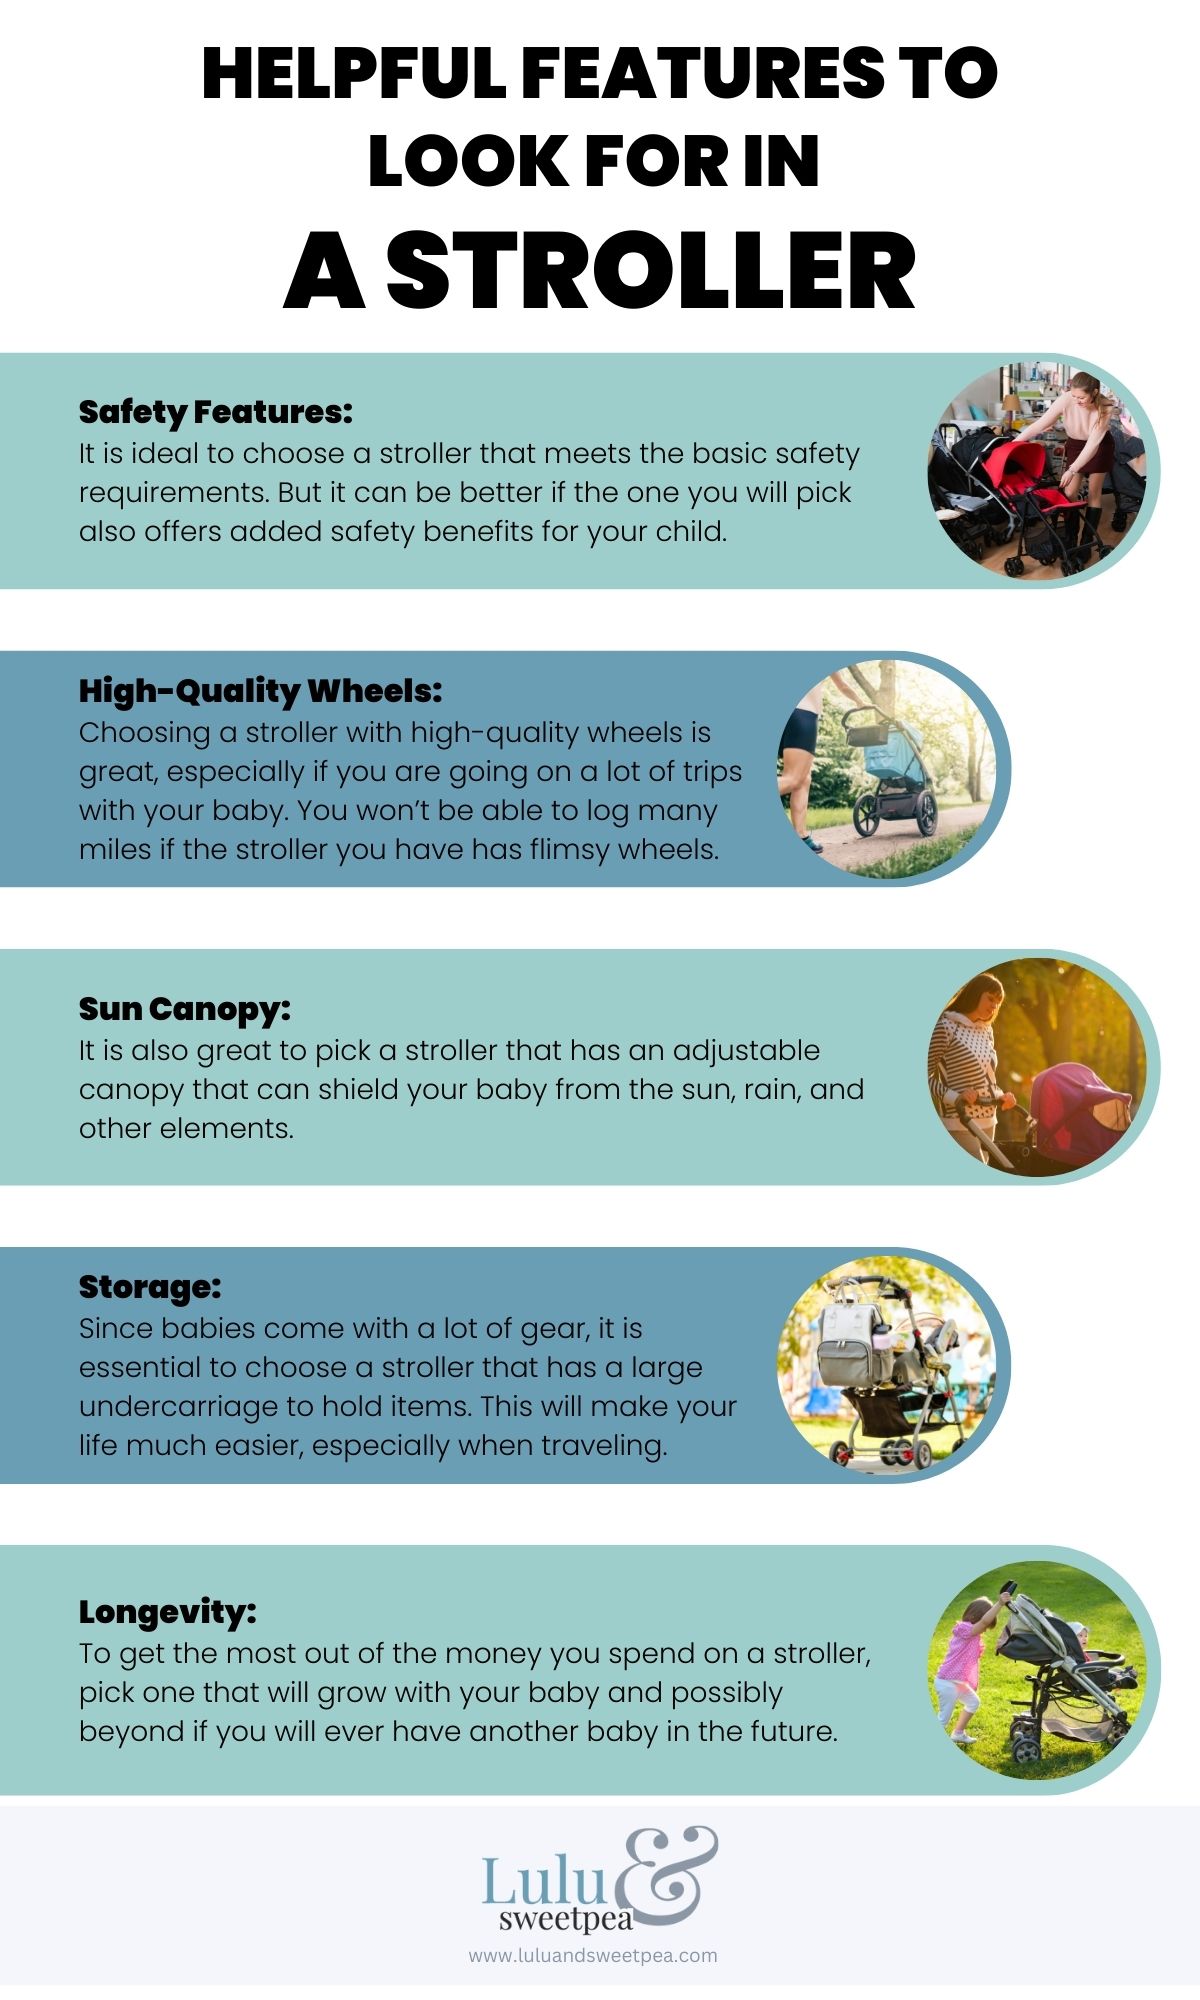 Helpful Features to Look for in a Stroller